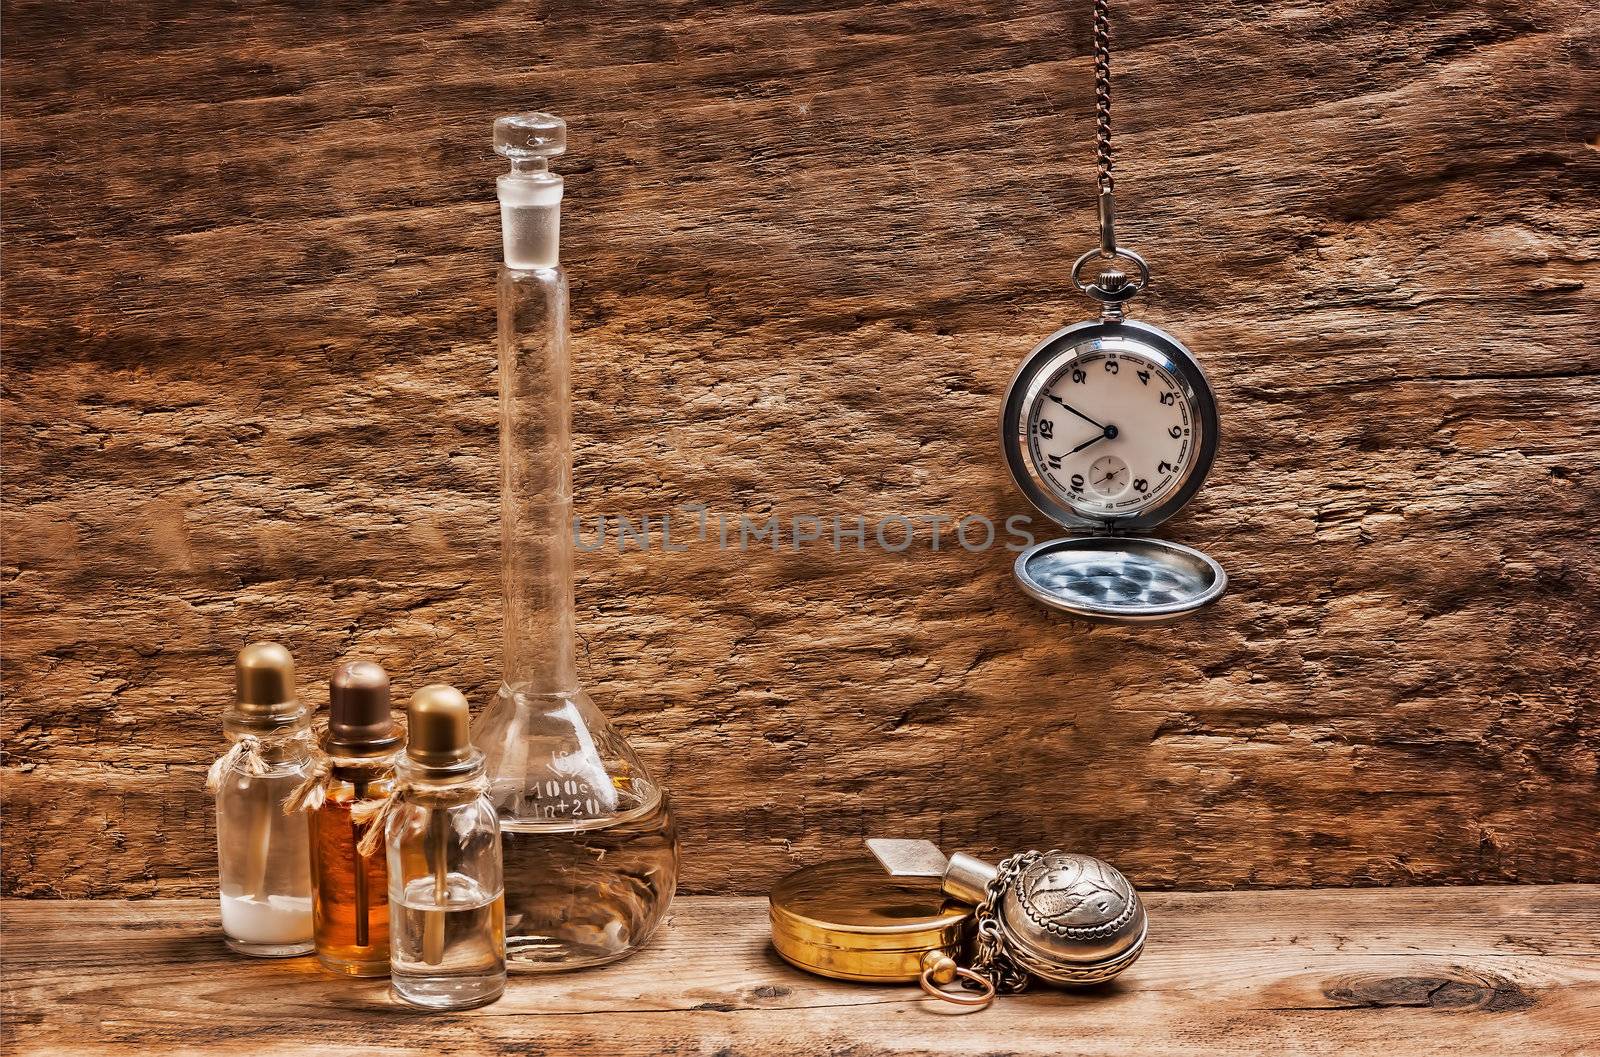 Vials with essential oils against the old wooden walls